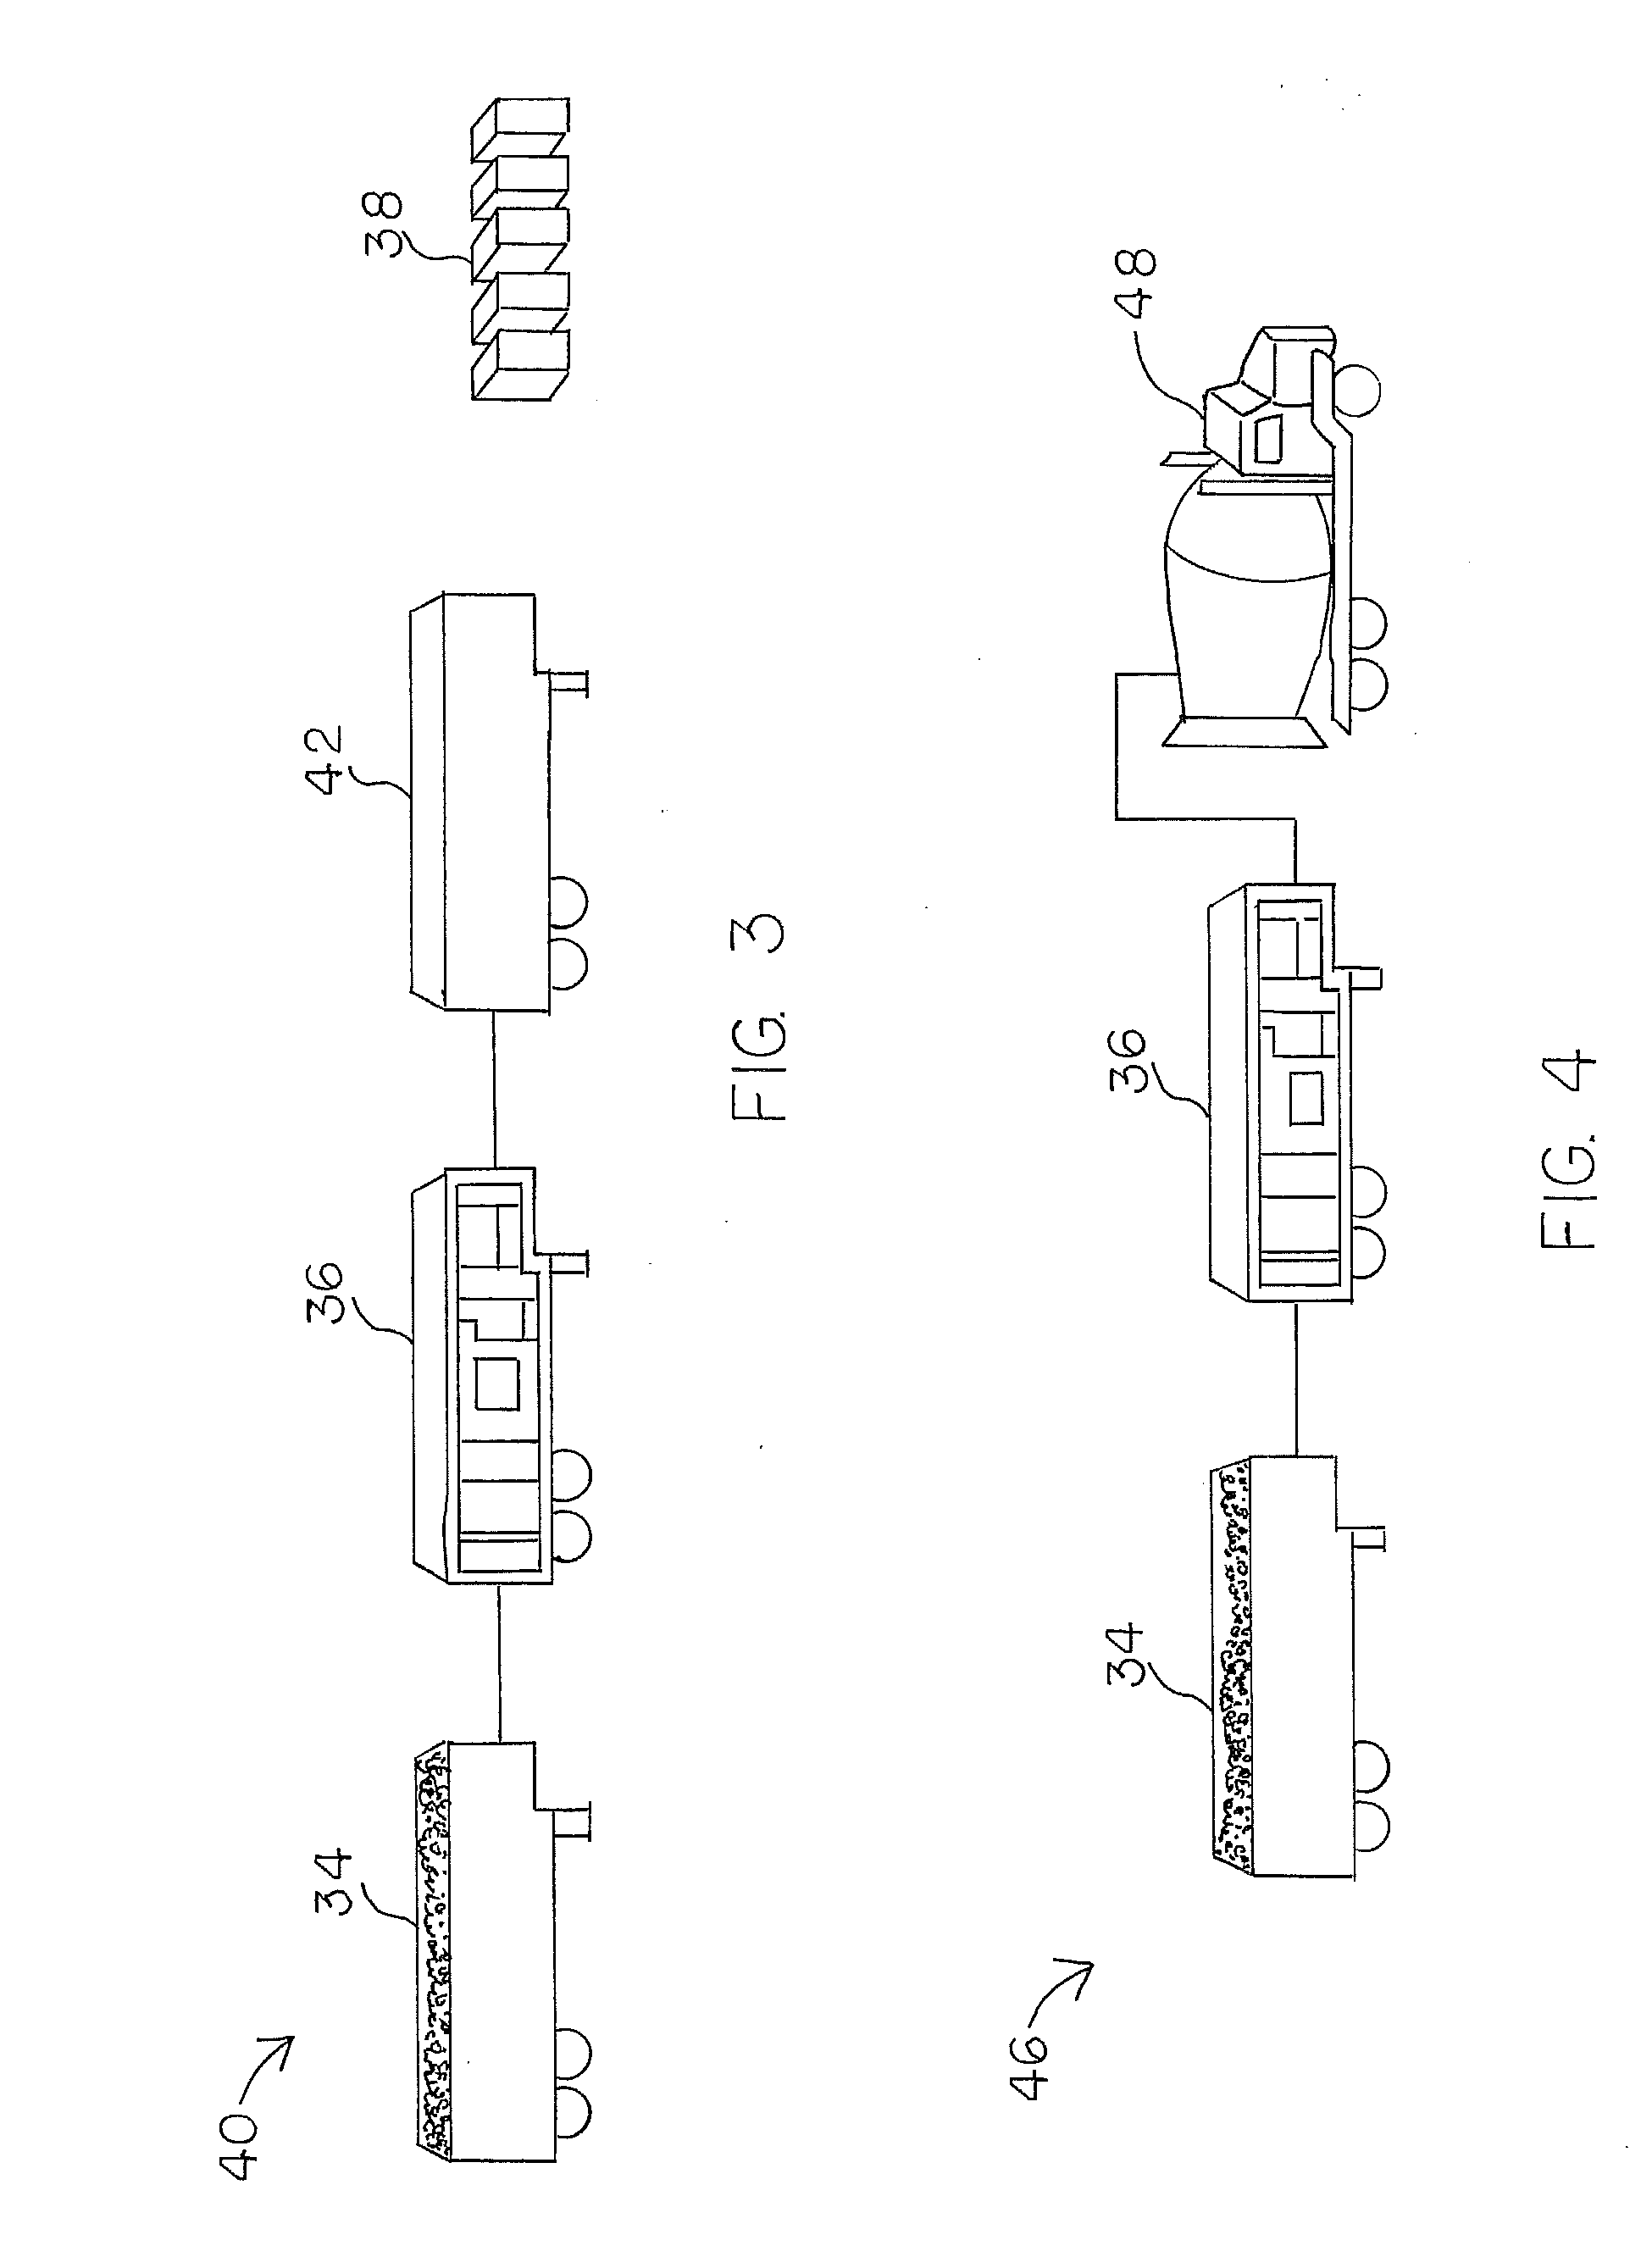 Mobile expanded polymer processing systems and methods